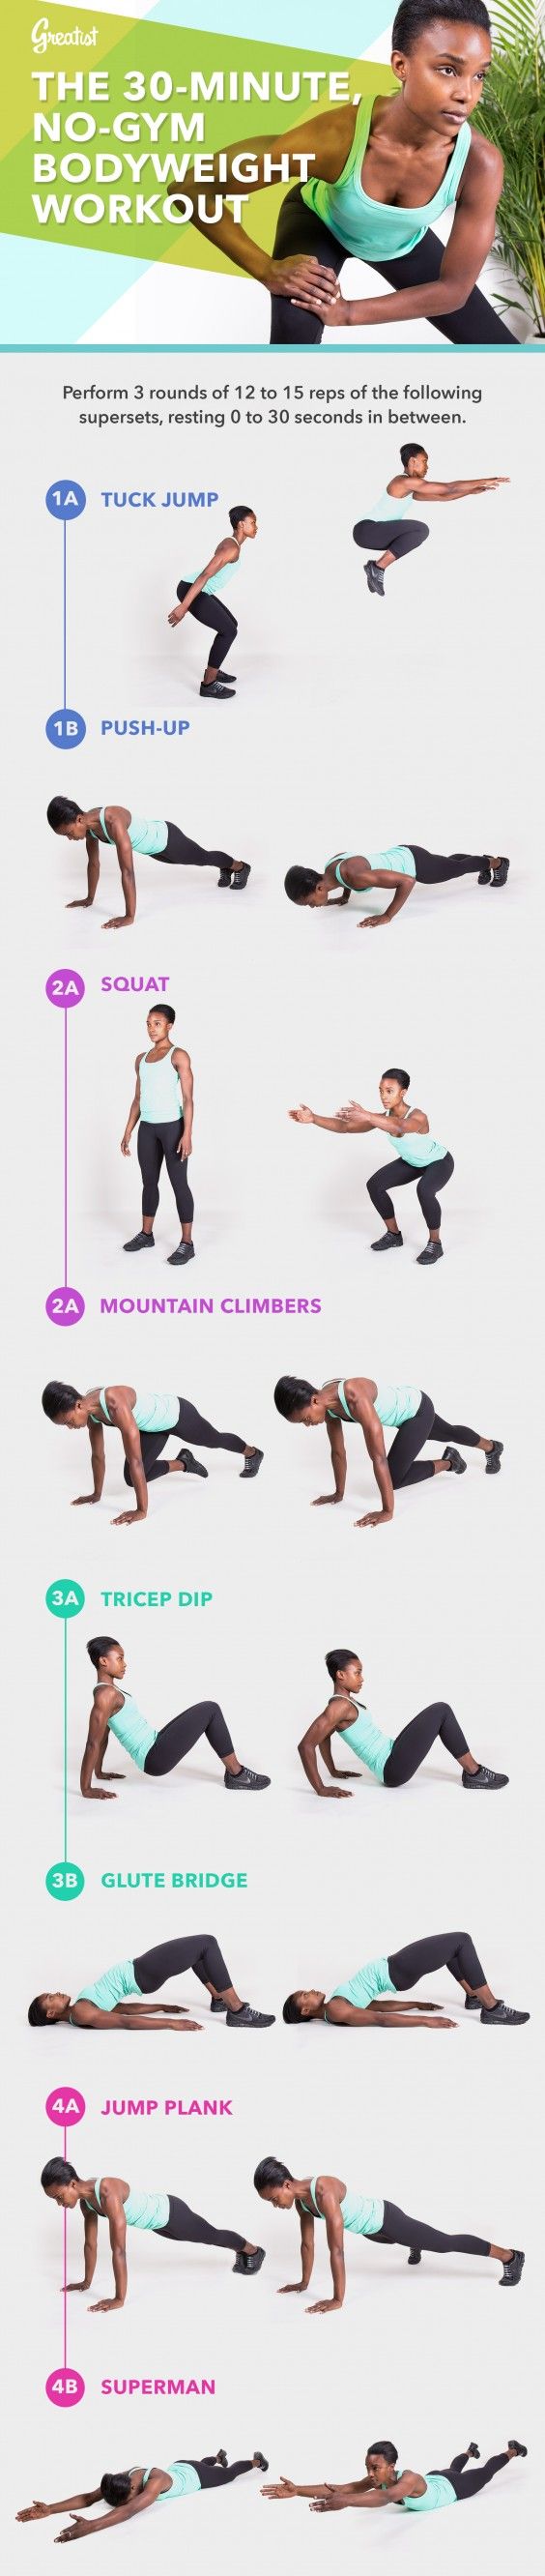 Bodyweight workouts: How to exercise at home without any equipment